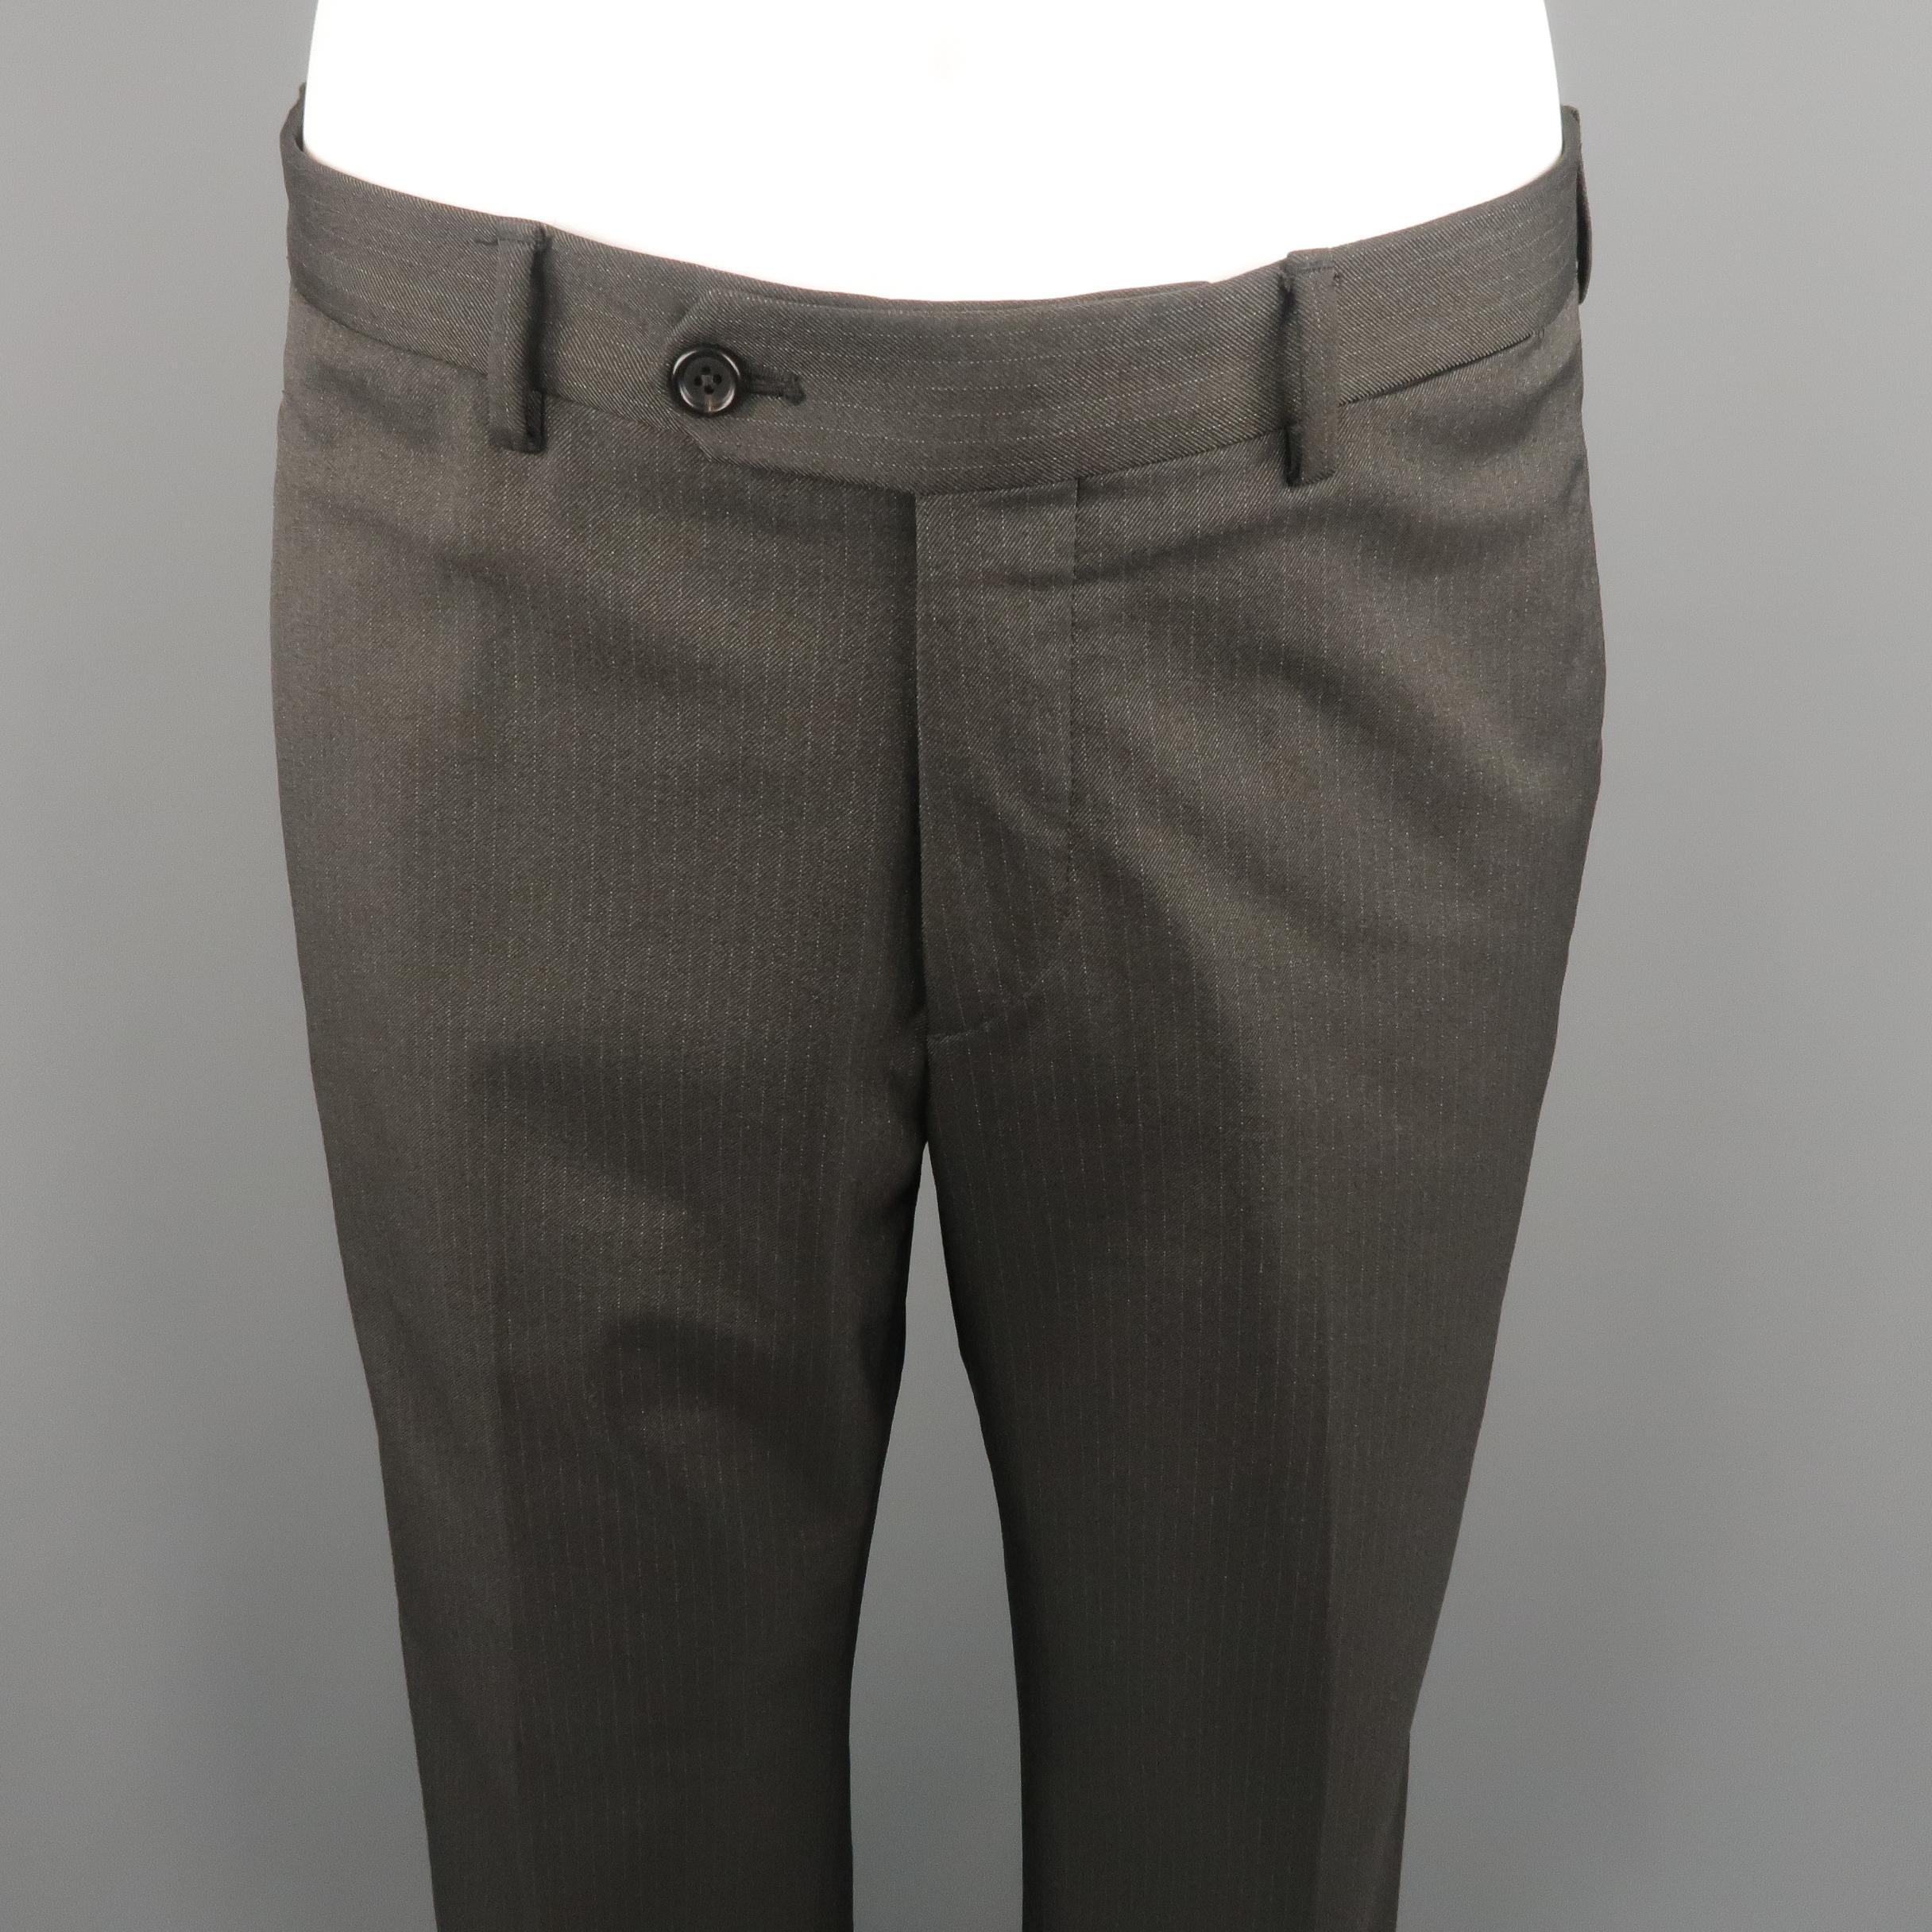 PRADA dress pants  in a charcoal tone, striped nylon blend with waistband, and piped pockets. Made in Italy.
 
Excellent Pre-Owned Condition.
Marked: 50  IT
 
Measurements:
 
Waist: 35 in.
Rise: 10 in.
Inseam: 33 in.